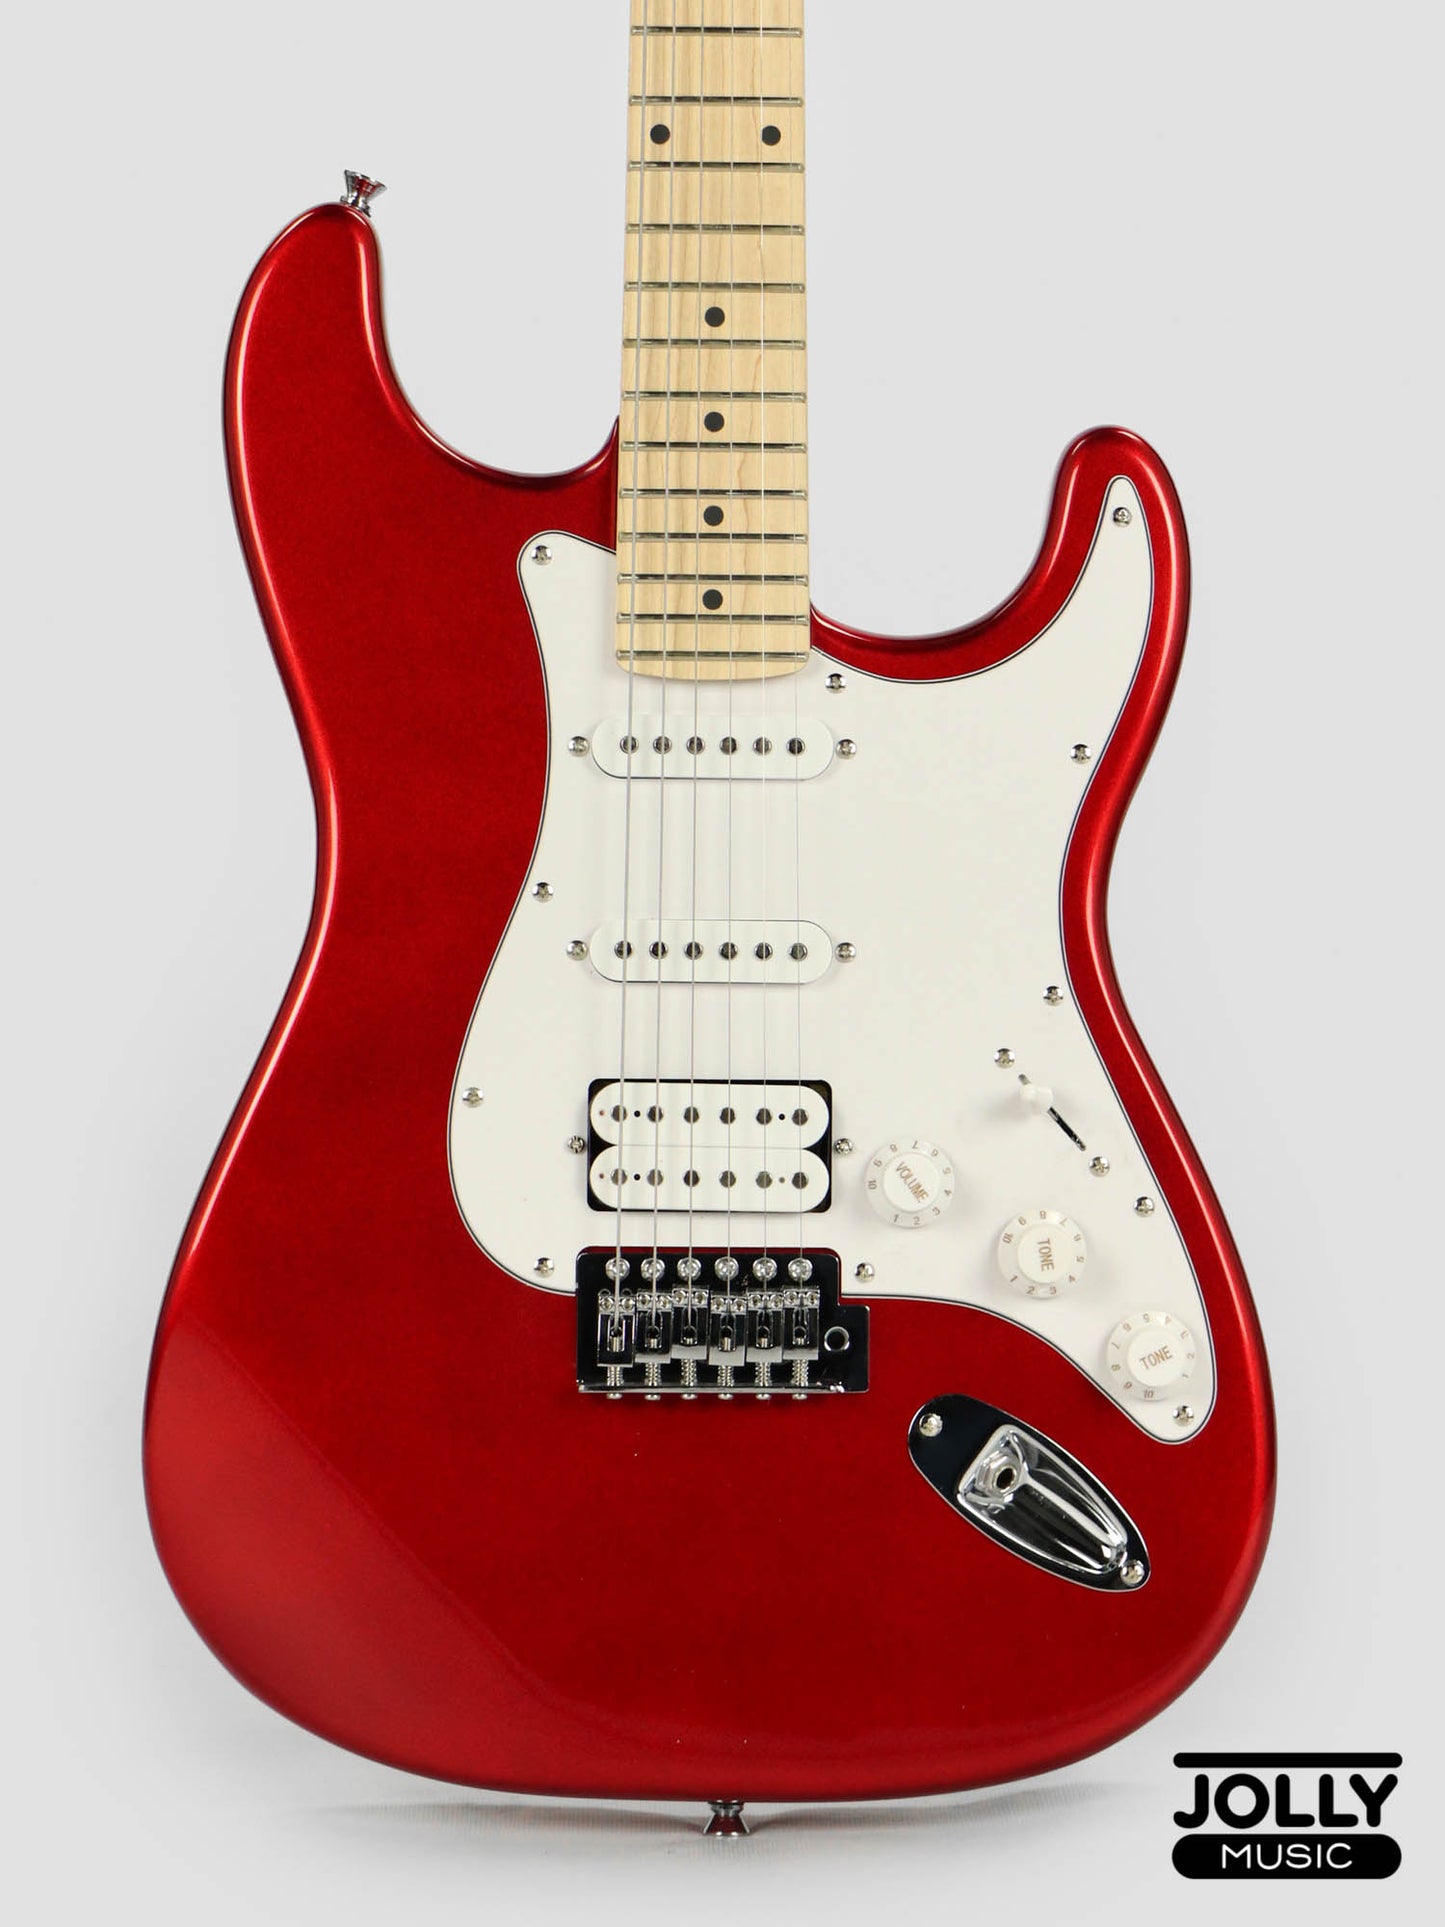 JCraft S-1H HSS Electric Guitar with Gigbag - Candy Apple Red